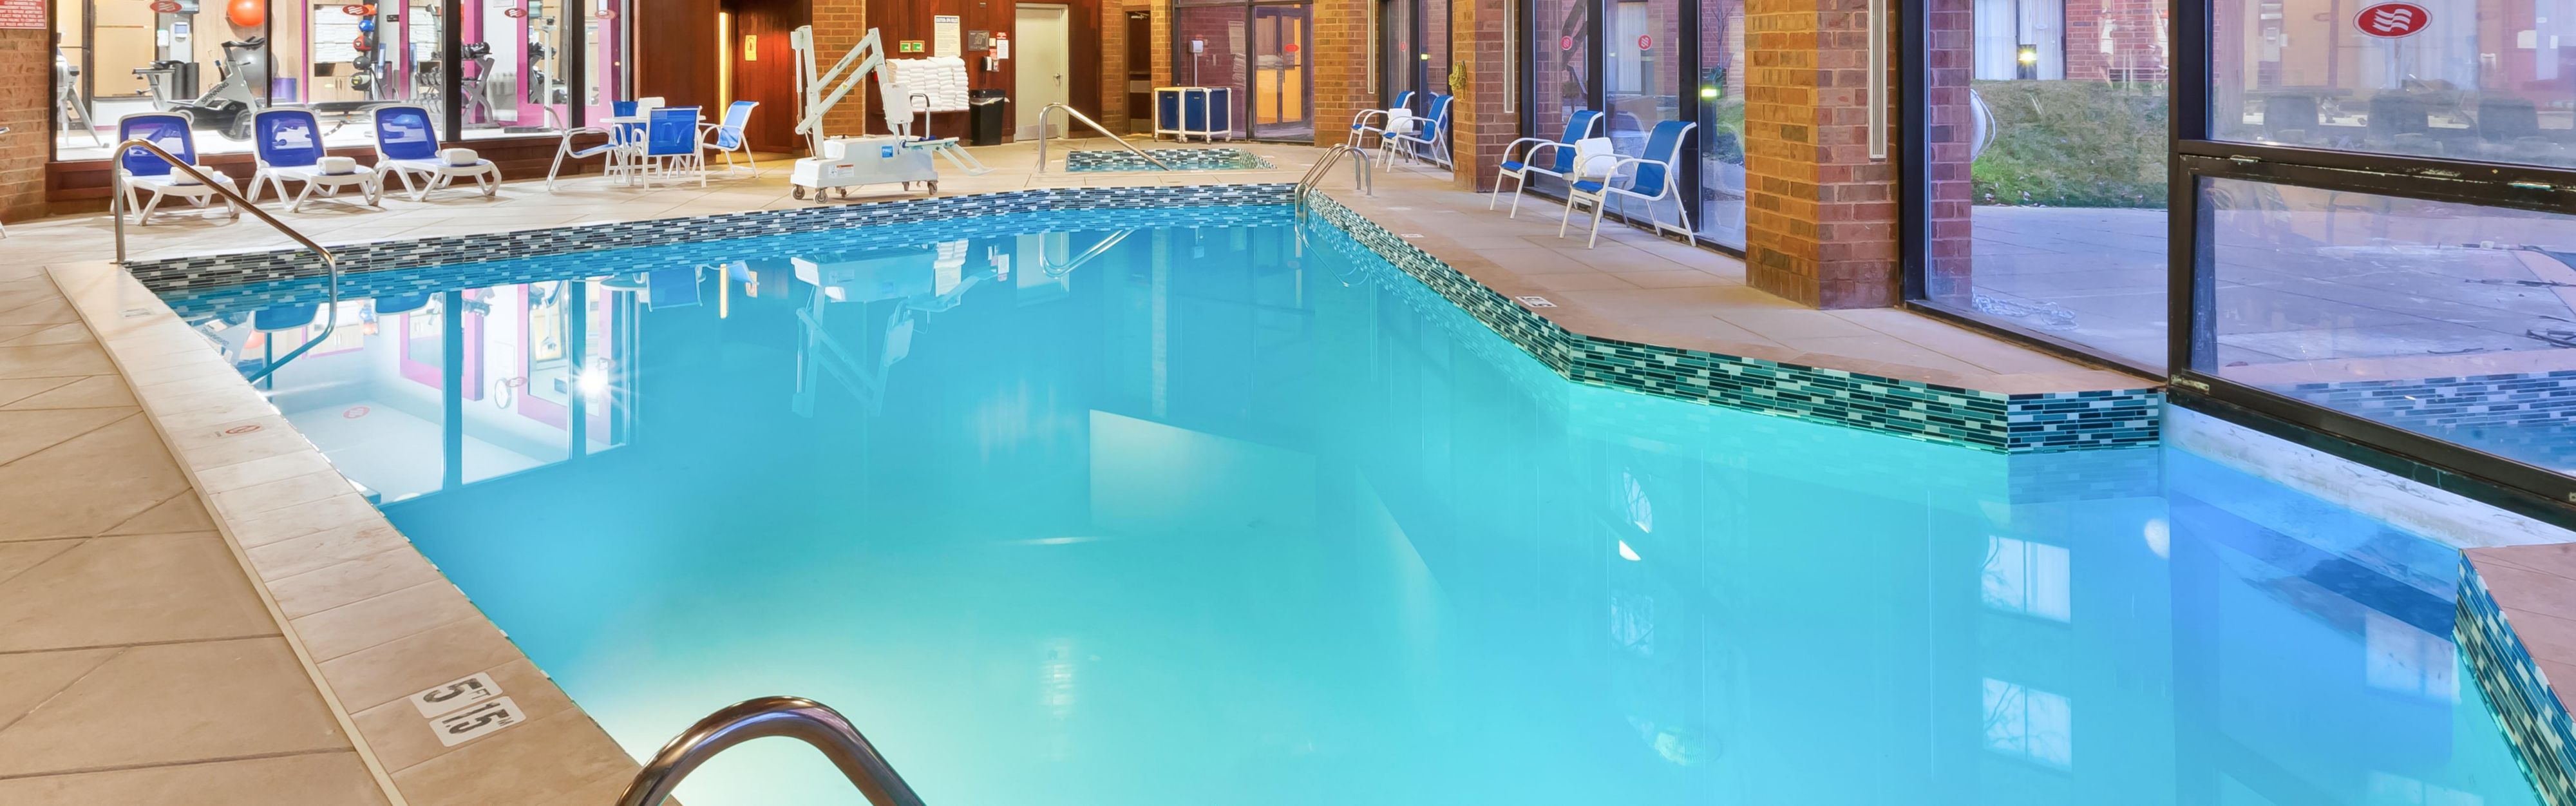 Indoor Pool and Hot Tub. Open 7am to 9pm daily.